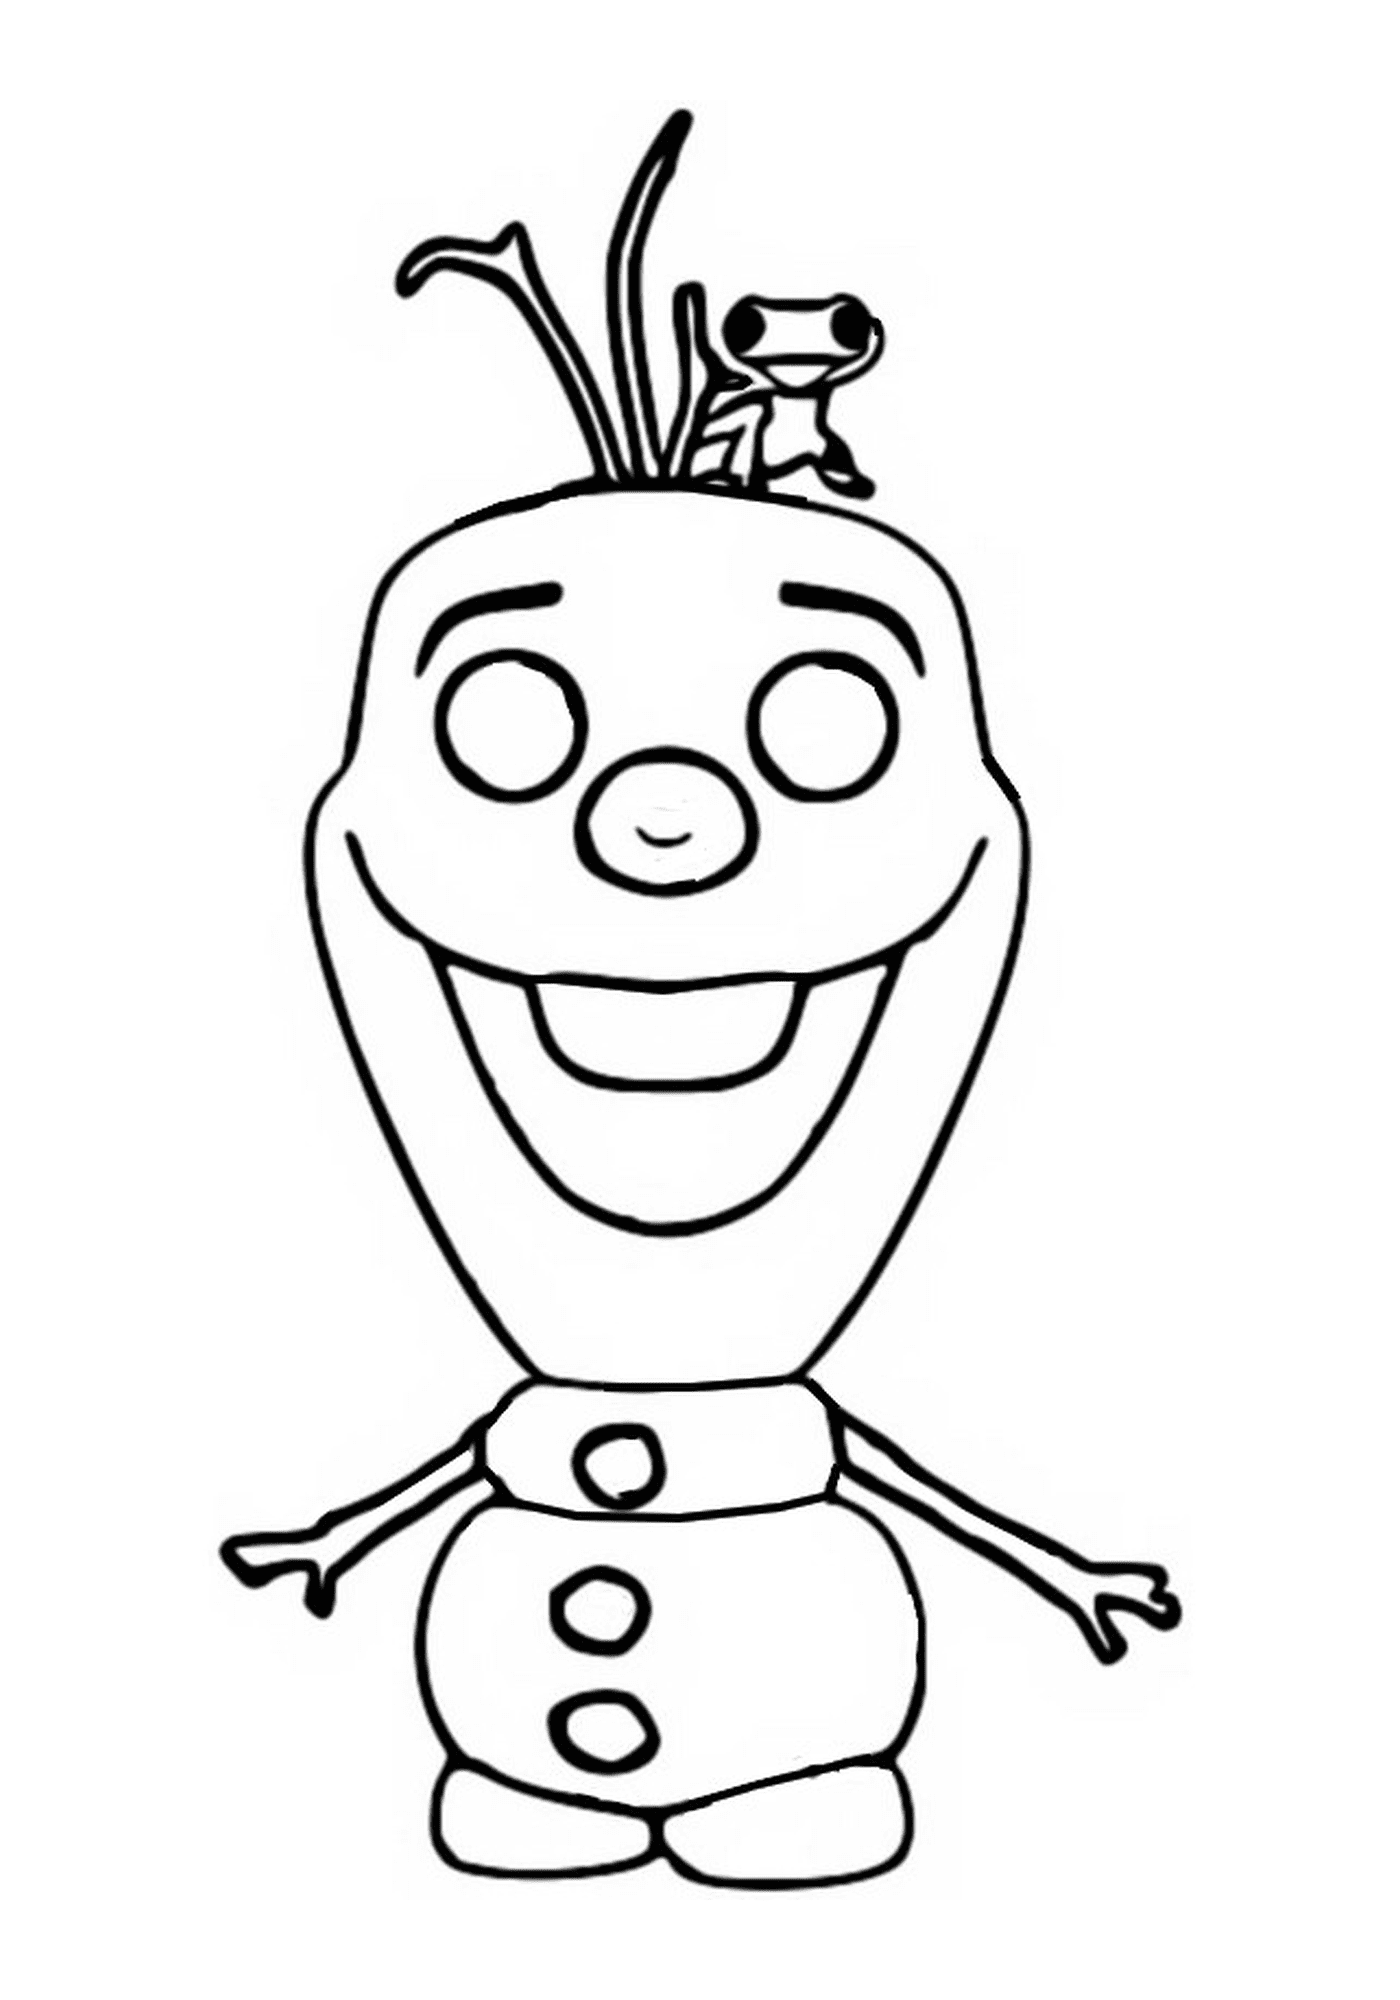  Olaf, Frozen 2, cartoon character smiling 